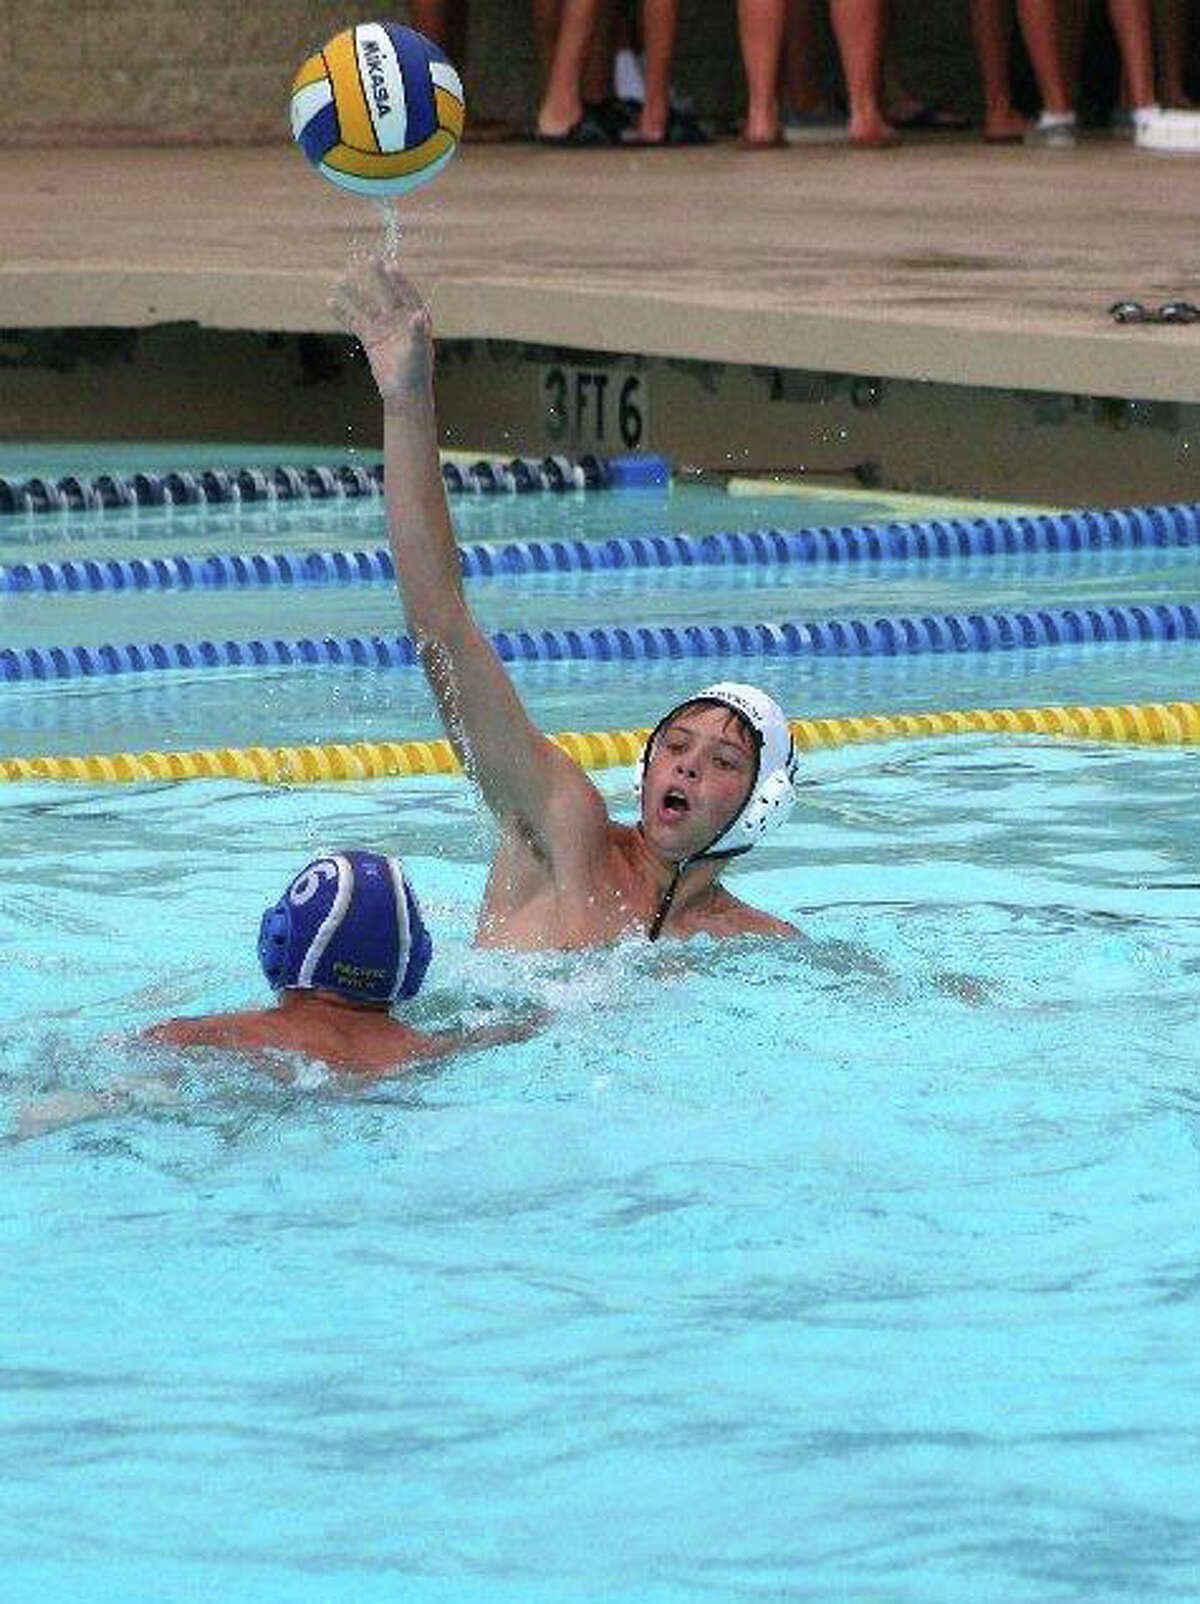 Greenwich Water Polo's Ben Wurst, one of the top scorers on the GWP U14 team makes a pass over a defender Wednesday in California. The U14 teams compiled a 4-4 record while playing in the Platinum Division of the 48 team tournament, placing 18th overall.